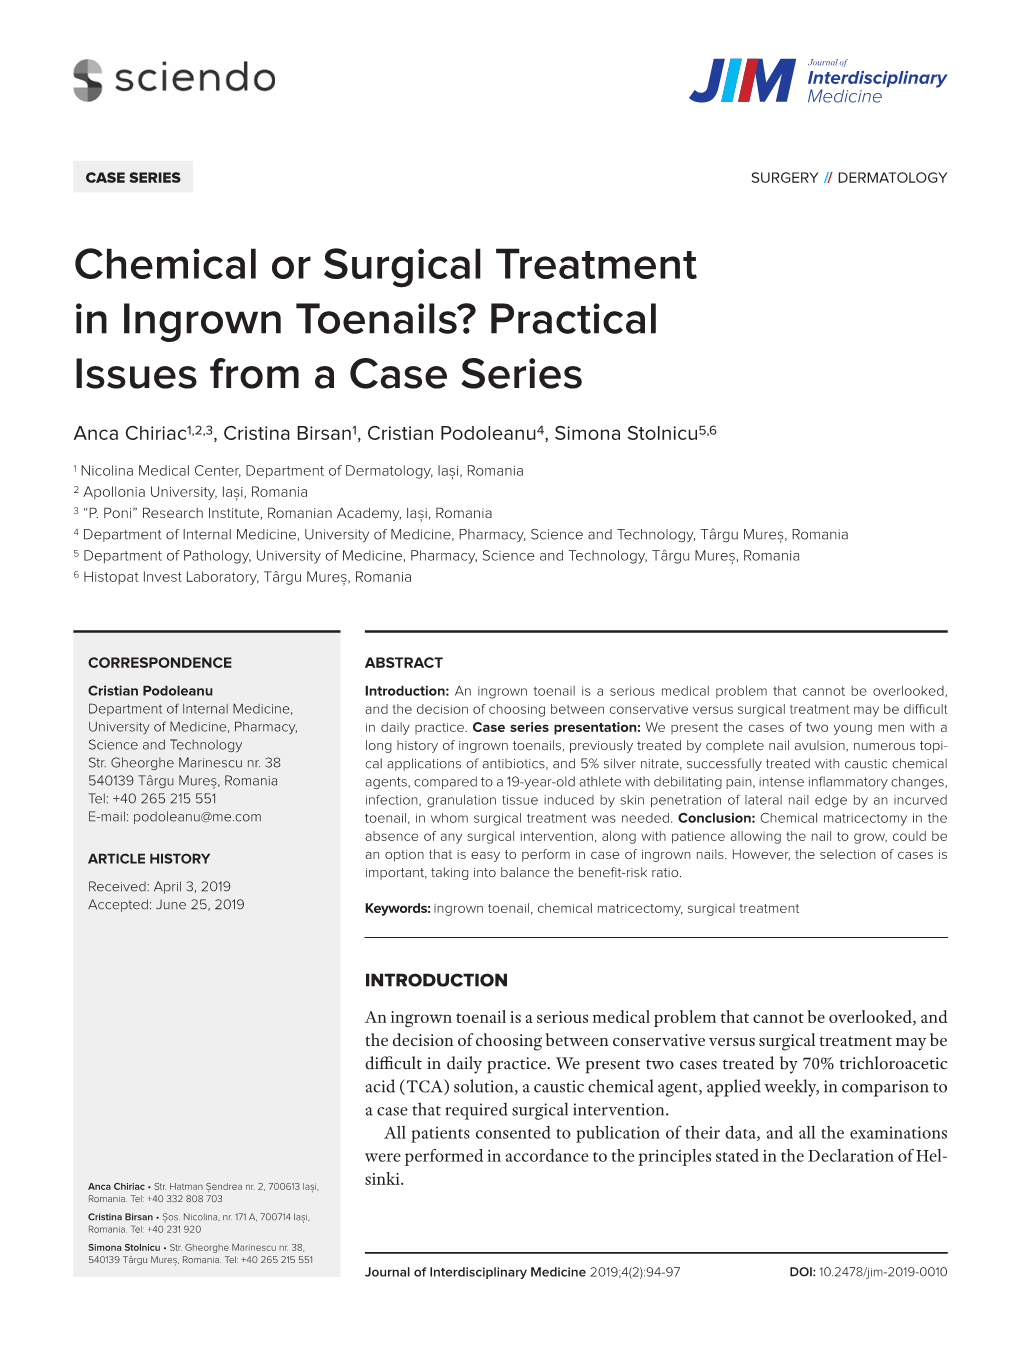 Chemical Or Surgical Treatment in Ingrown Toenails? Practical Issues from a Case Series